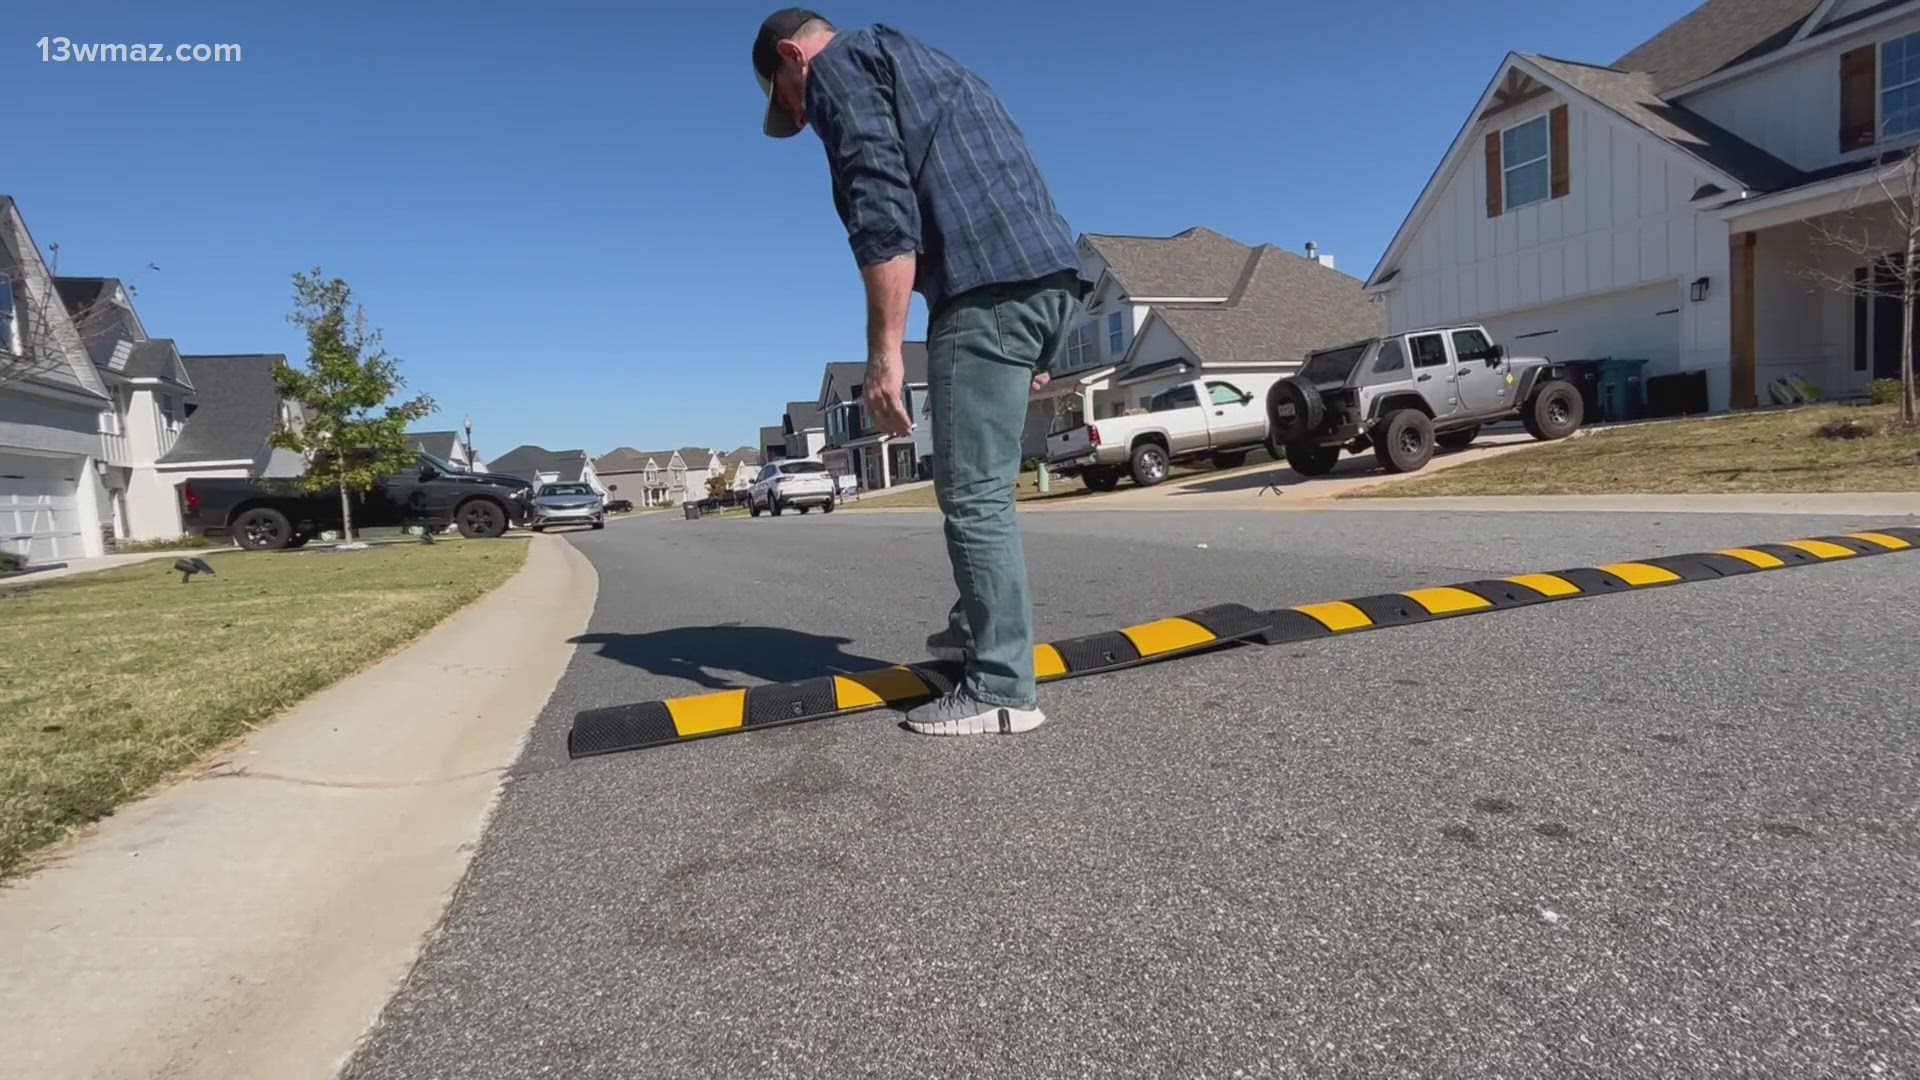 Sean Leonard spent hundreds of dollars installing speed bumps. The next day, the City of Perry told him that was illegal.